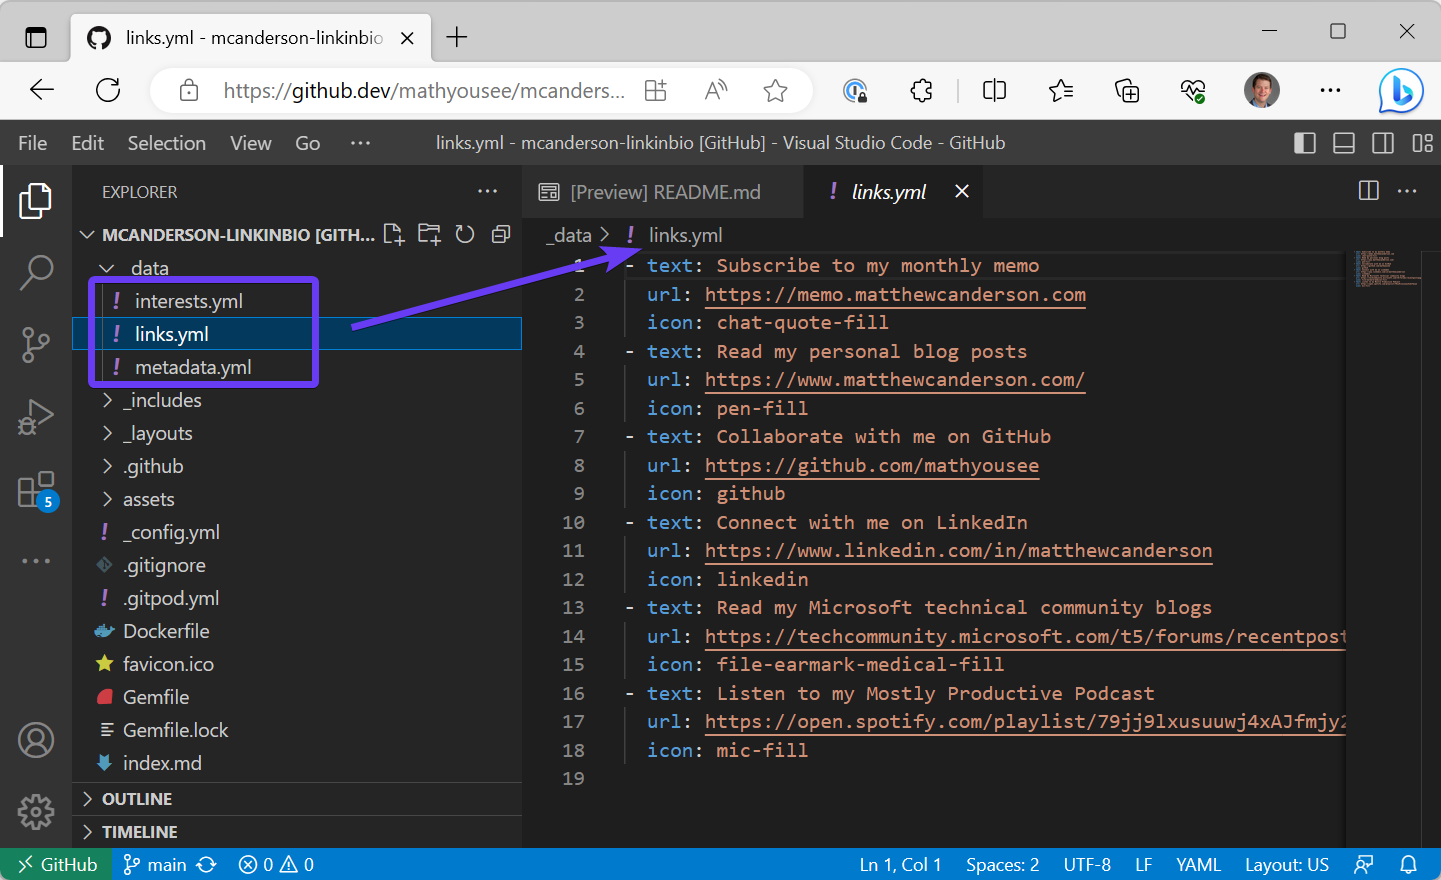 a screen capture of editing the site's links, using visual studio code on github.dev